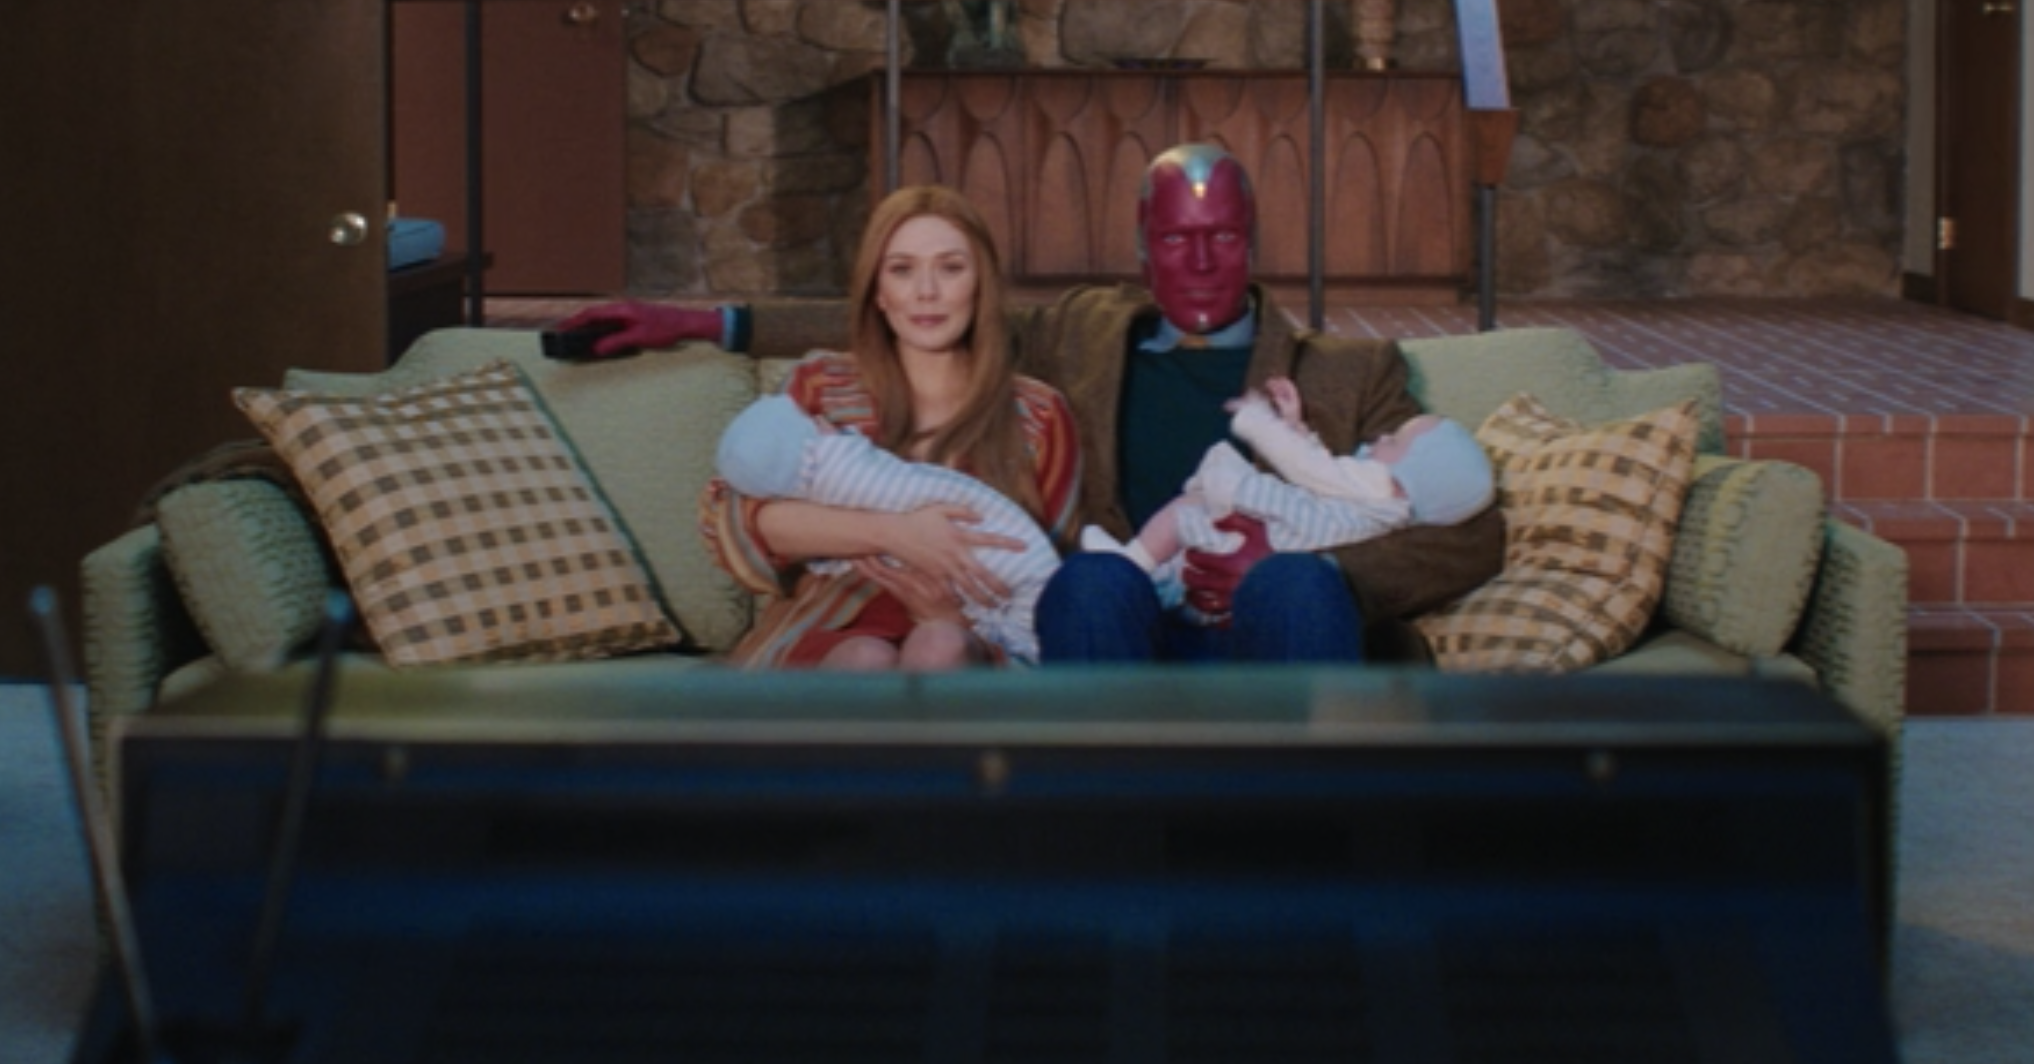 Wanda and Vision sitting on their couch and watching TV while holding their twin boys